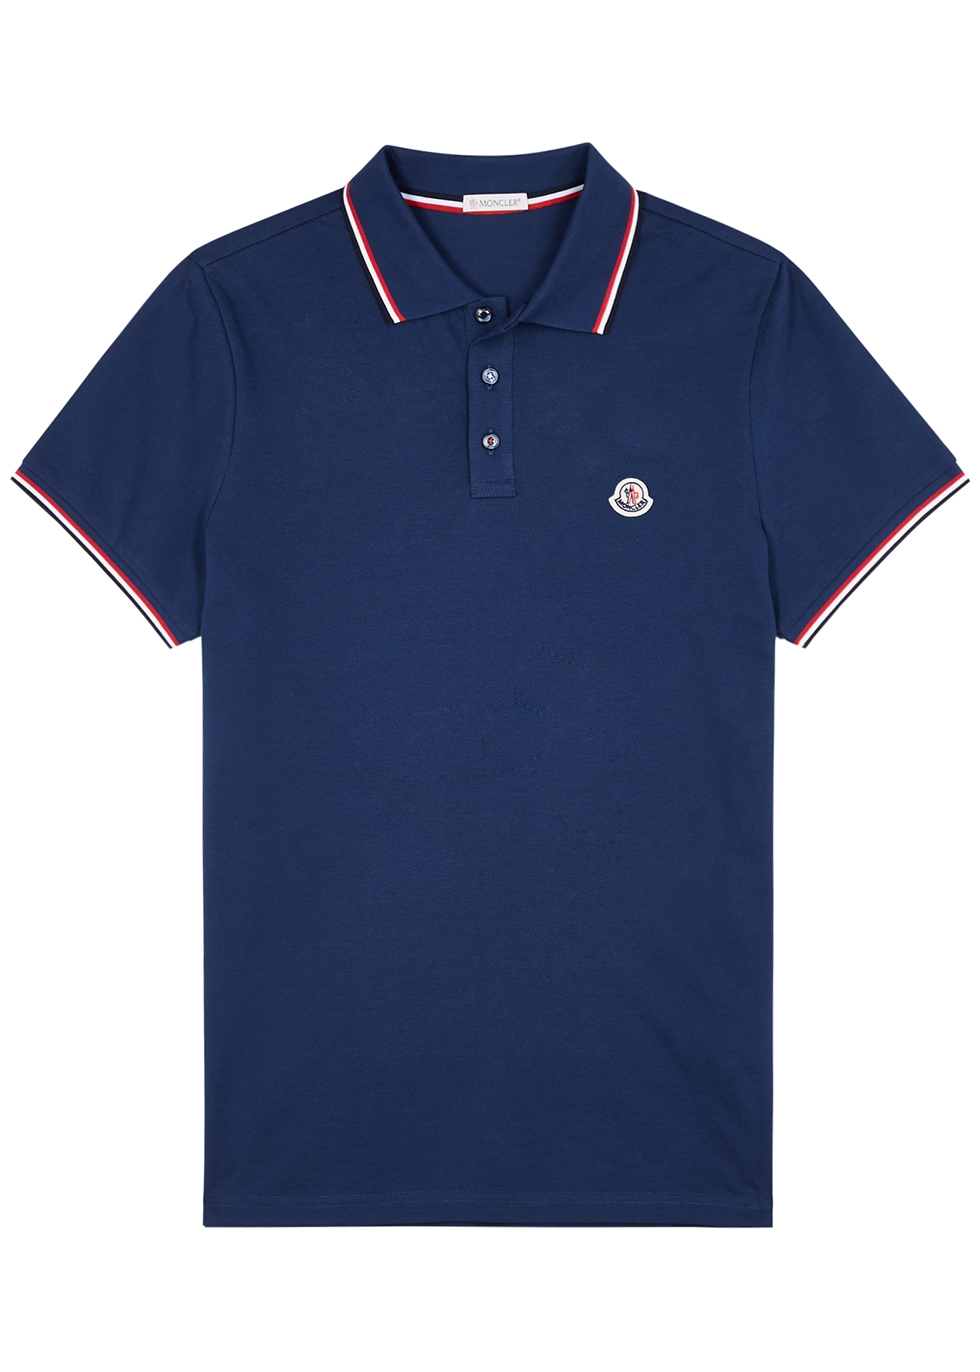 Original Moncler Polo T-shirt For Men And Women Tops Shopee Philippines ...